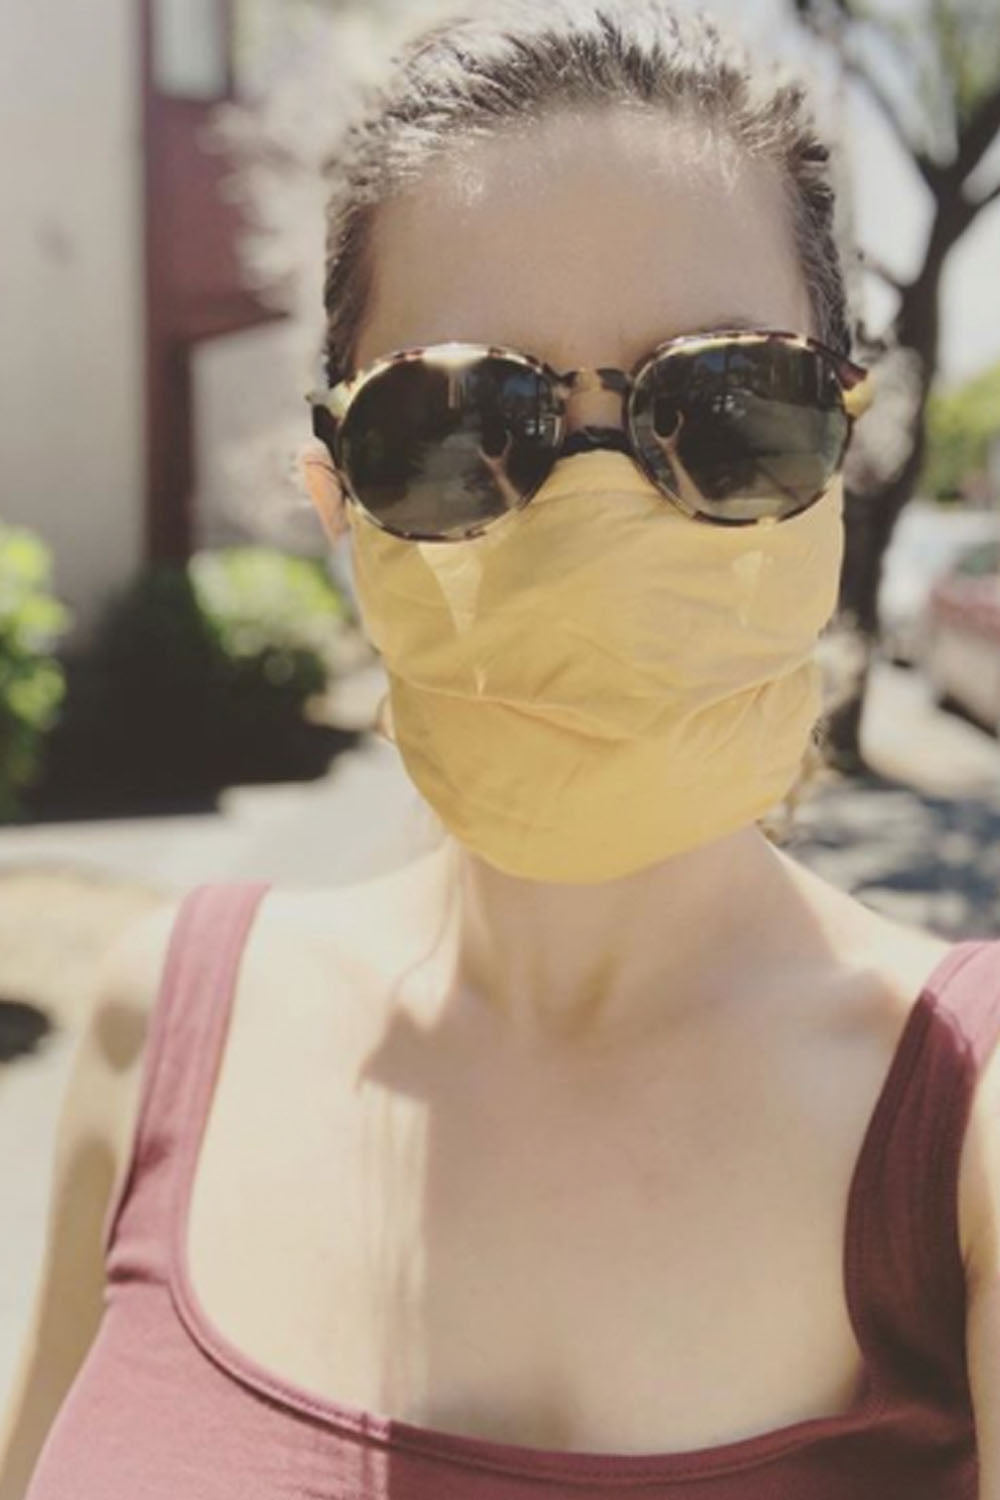 Woman in sunglasses and tank top wears light orange fabric face mask.